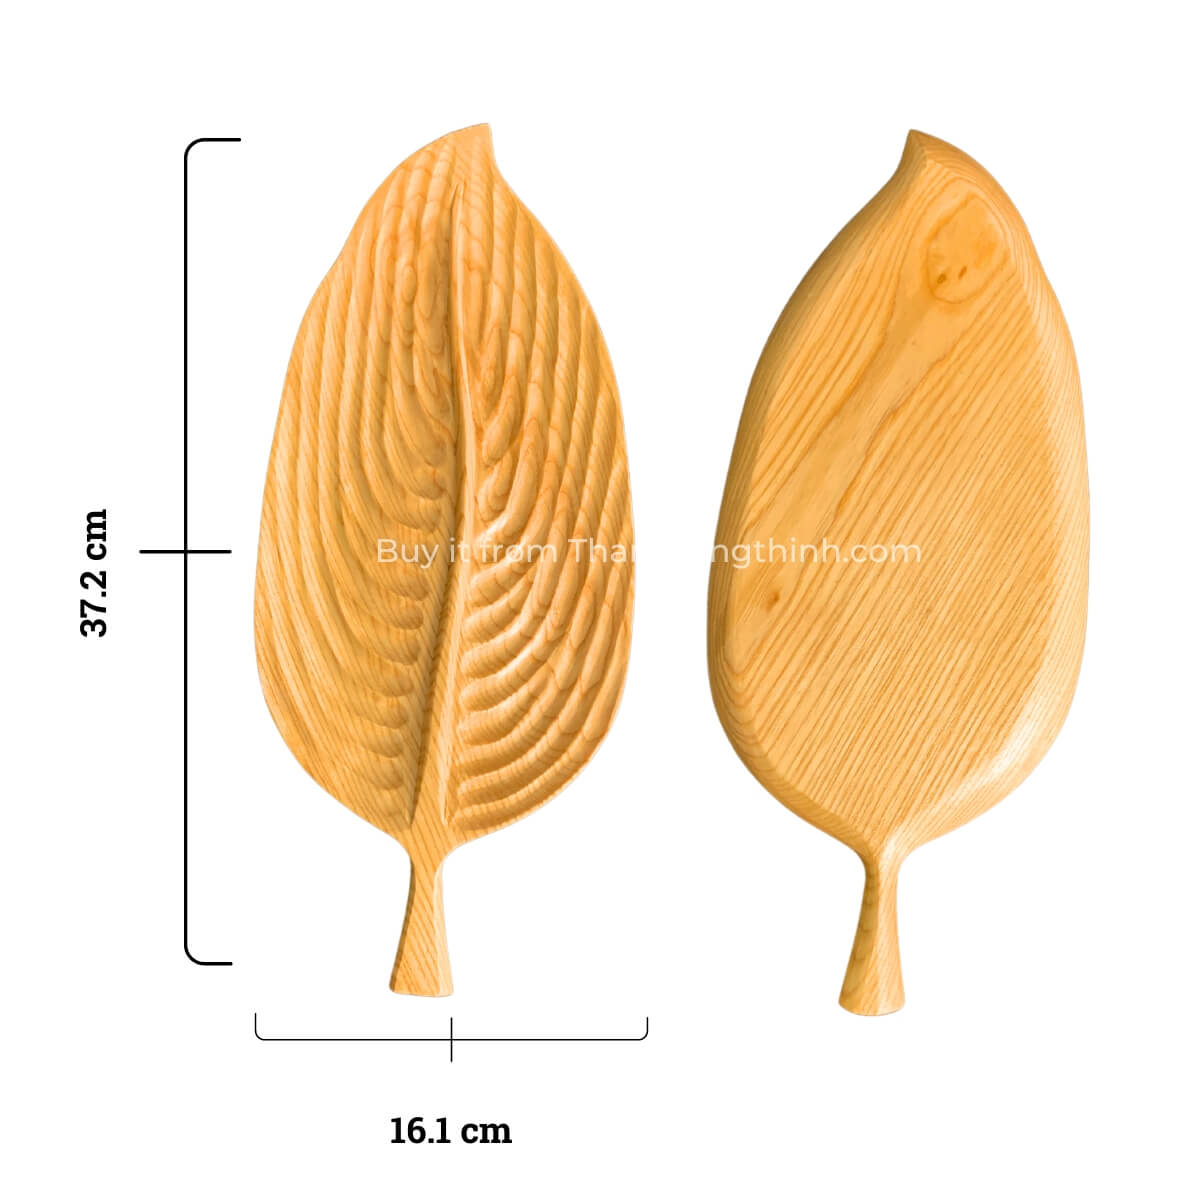 Unique wooden tray in the shape of a long leaf, perfect for convenient food storage